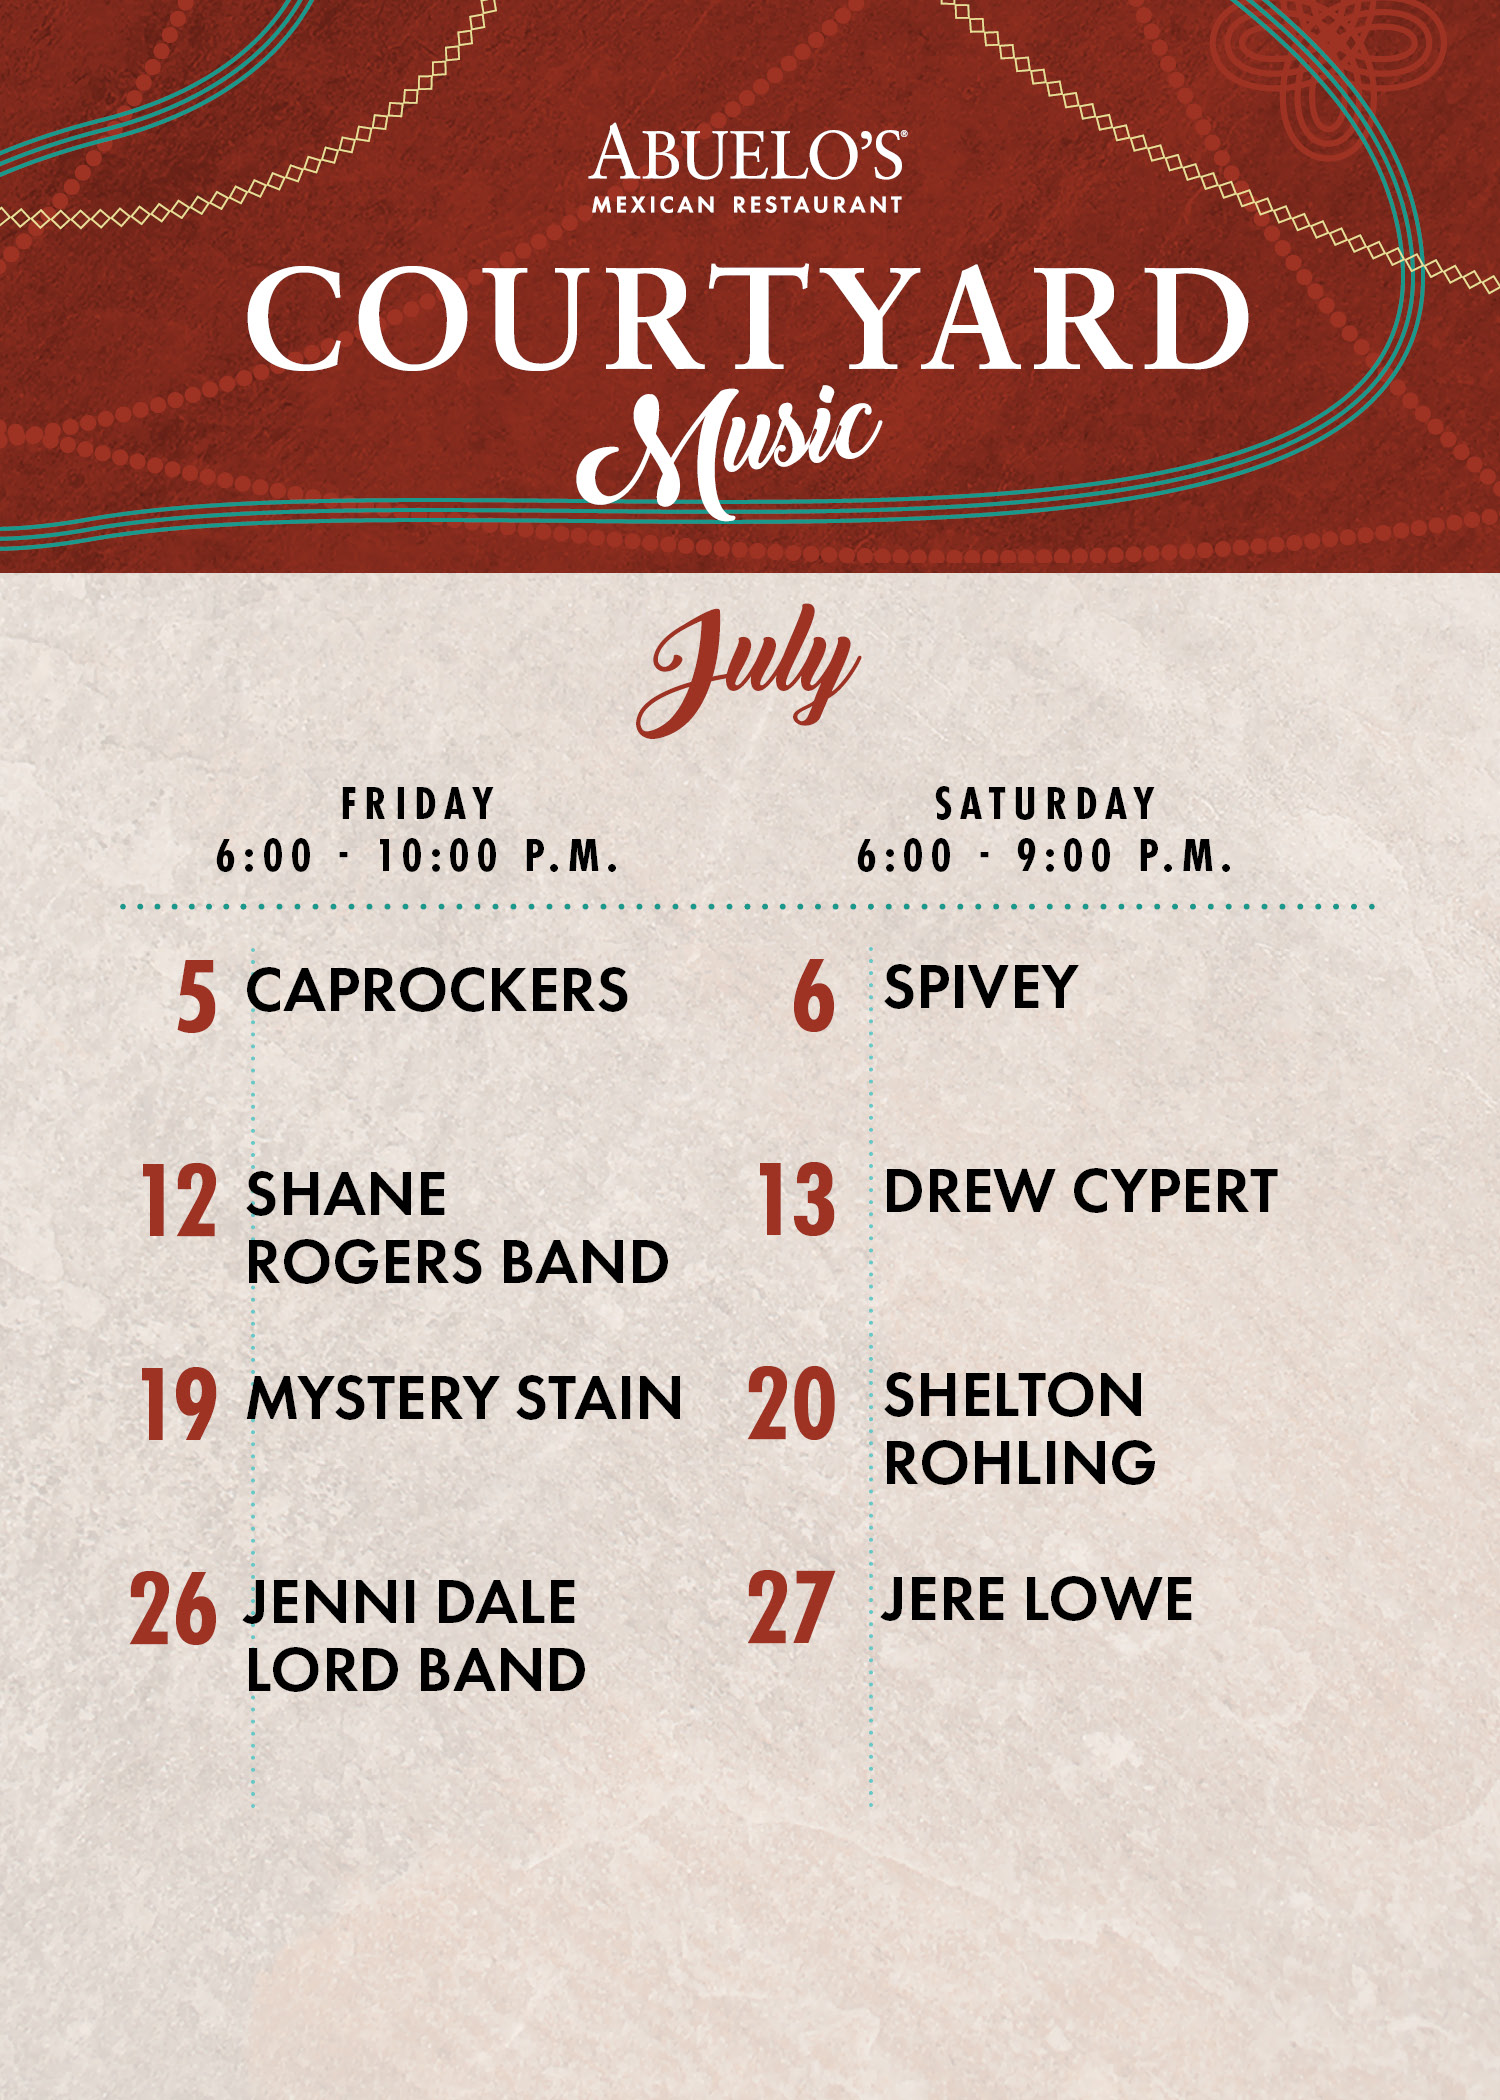 Abuelo's Live Music in the Courtyard, July schedule.